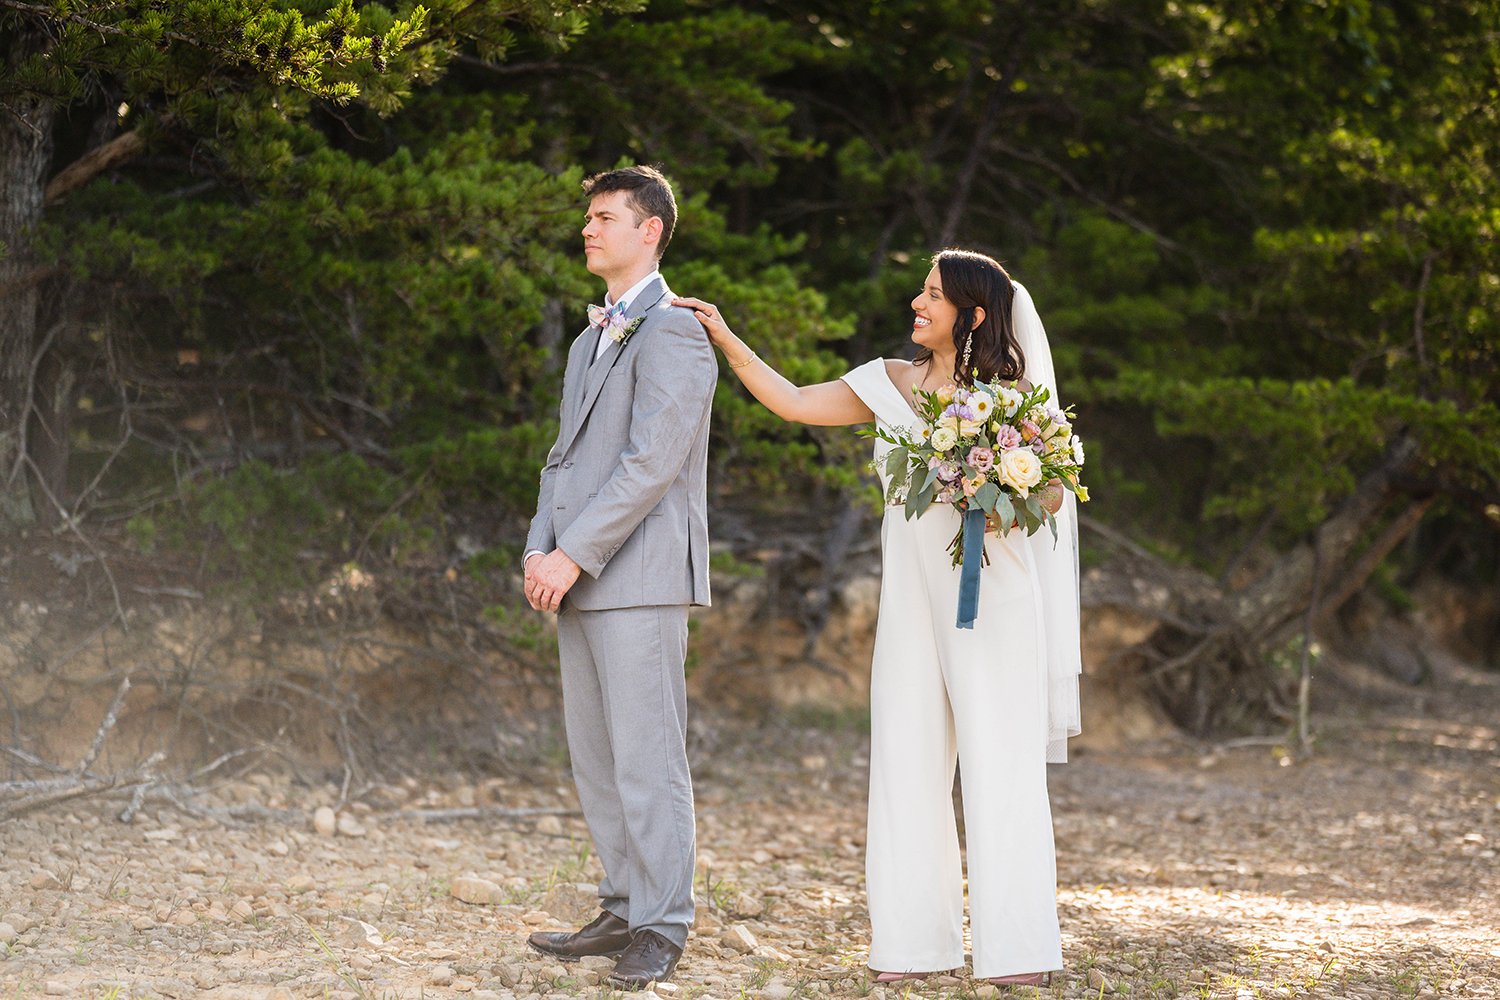 A marrier wearing a white jumpsuit and veil and holding a wedding bouquet taps their partner on the shoulder during their first look at Carvin’s Cove.